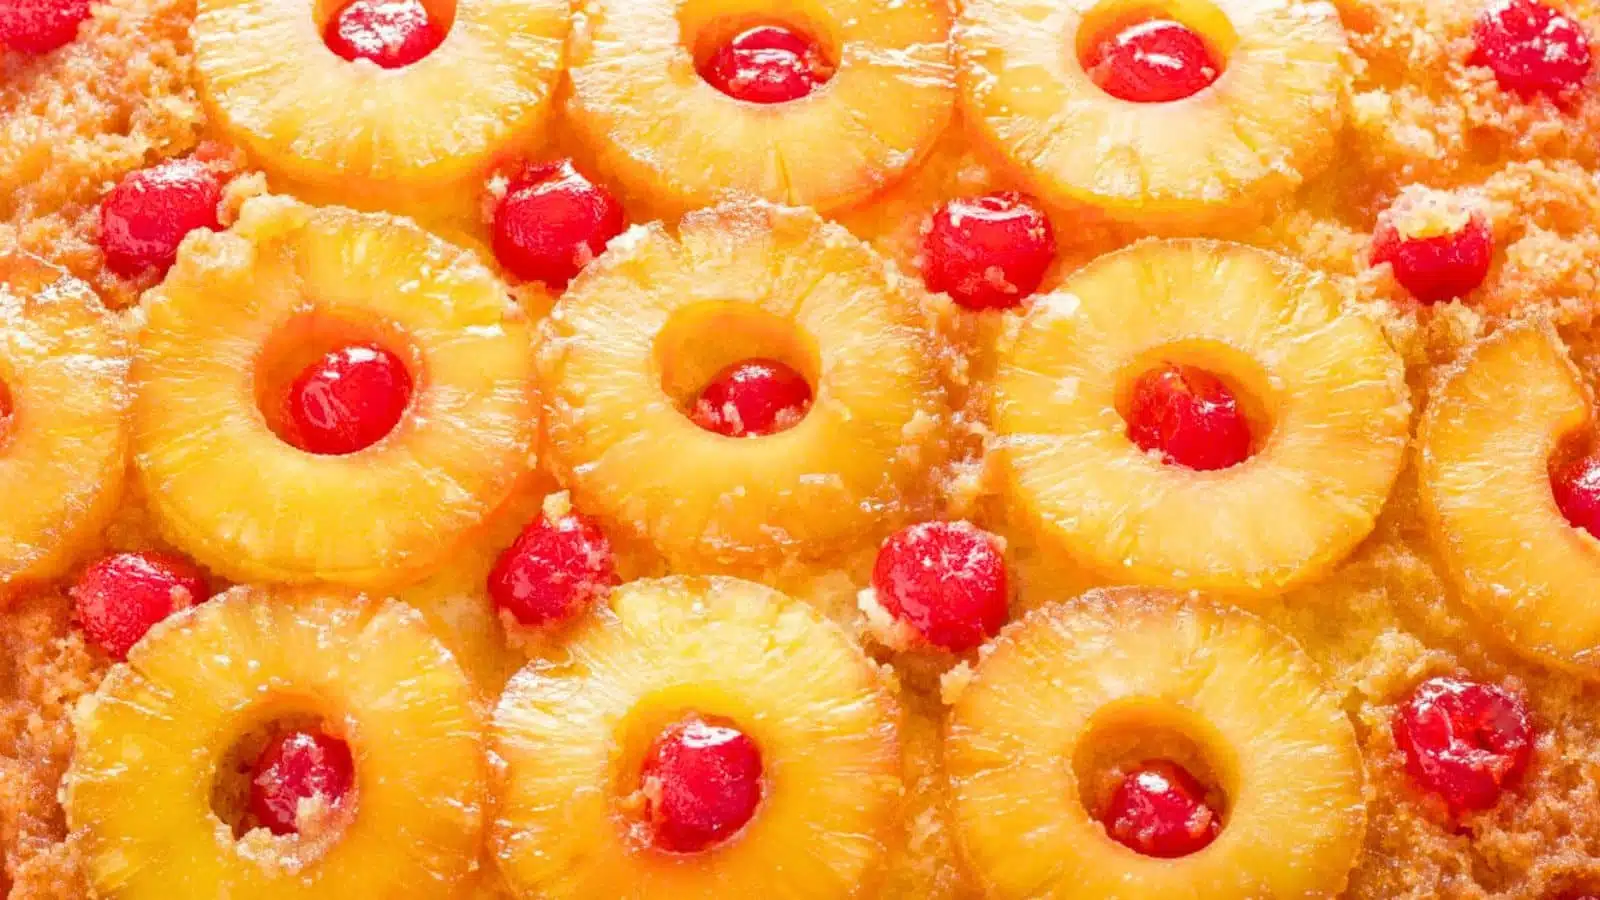 pineapple slices with cherries in and around them on a cake